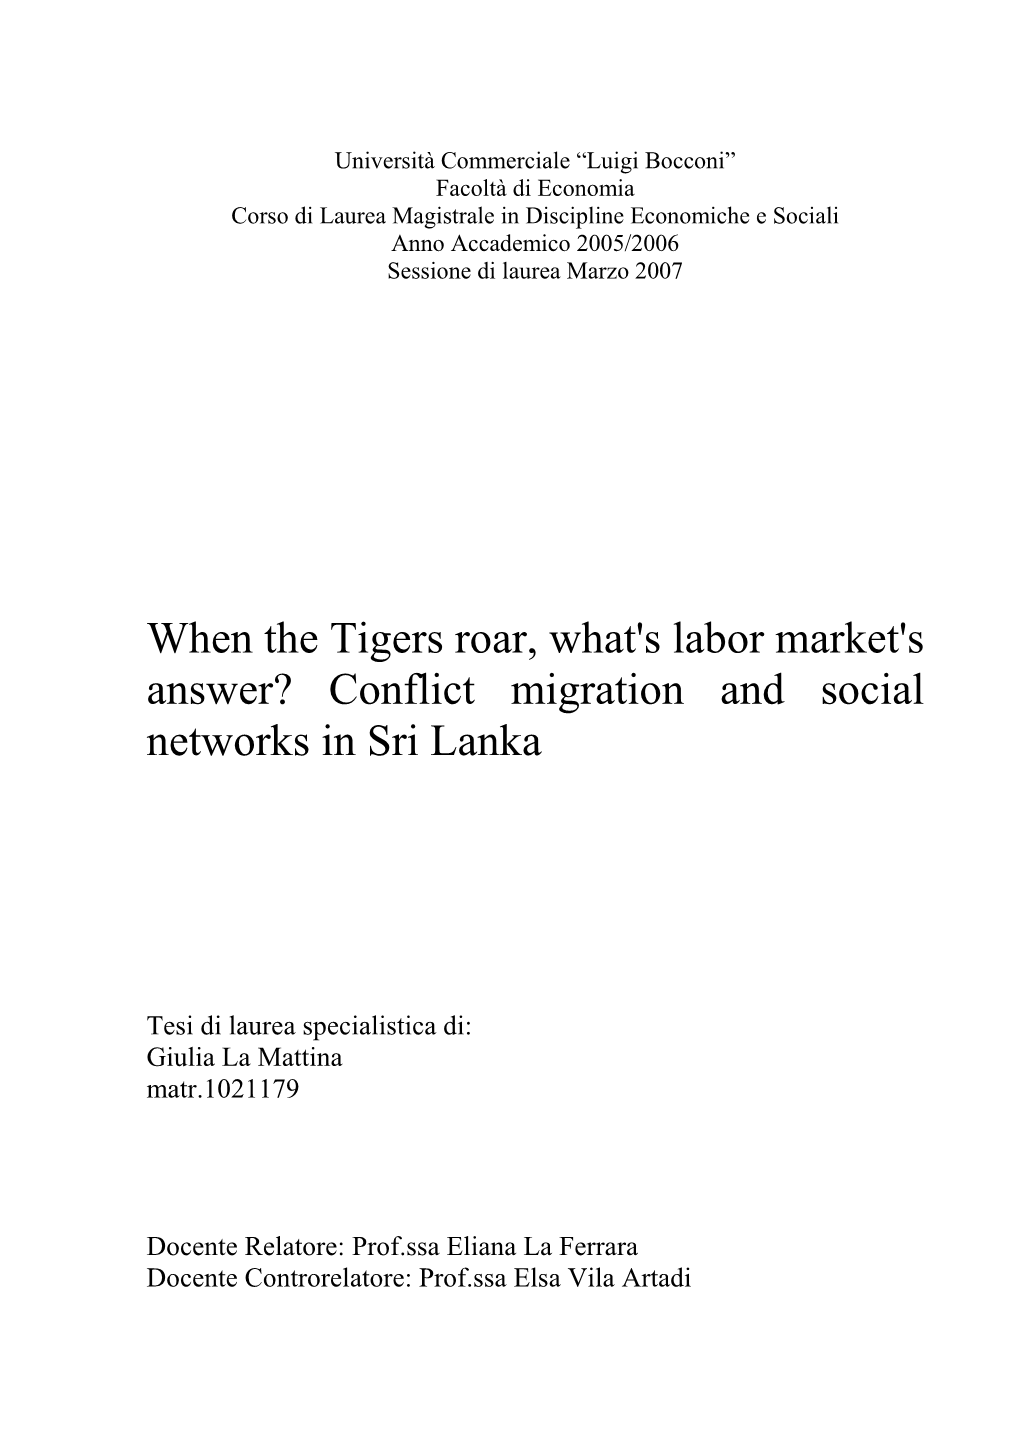 When the Tigers Roar, What's Labor Market's Answer? Conflict Migration and Social Networks in Sri Lanka